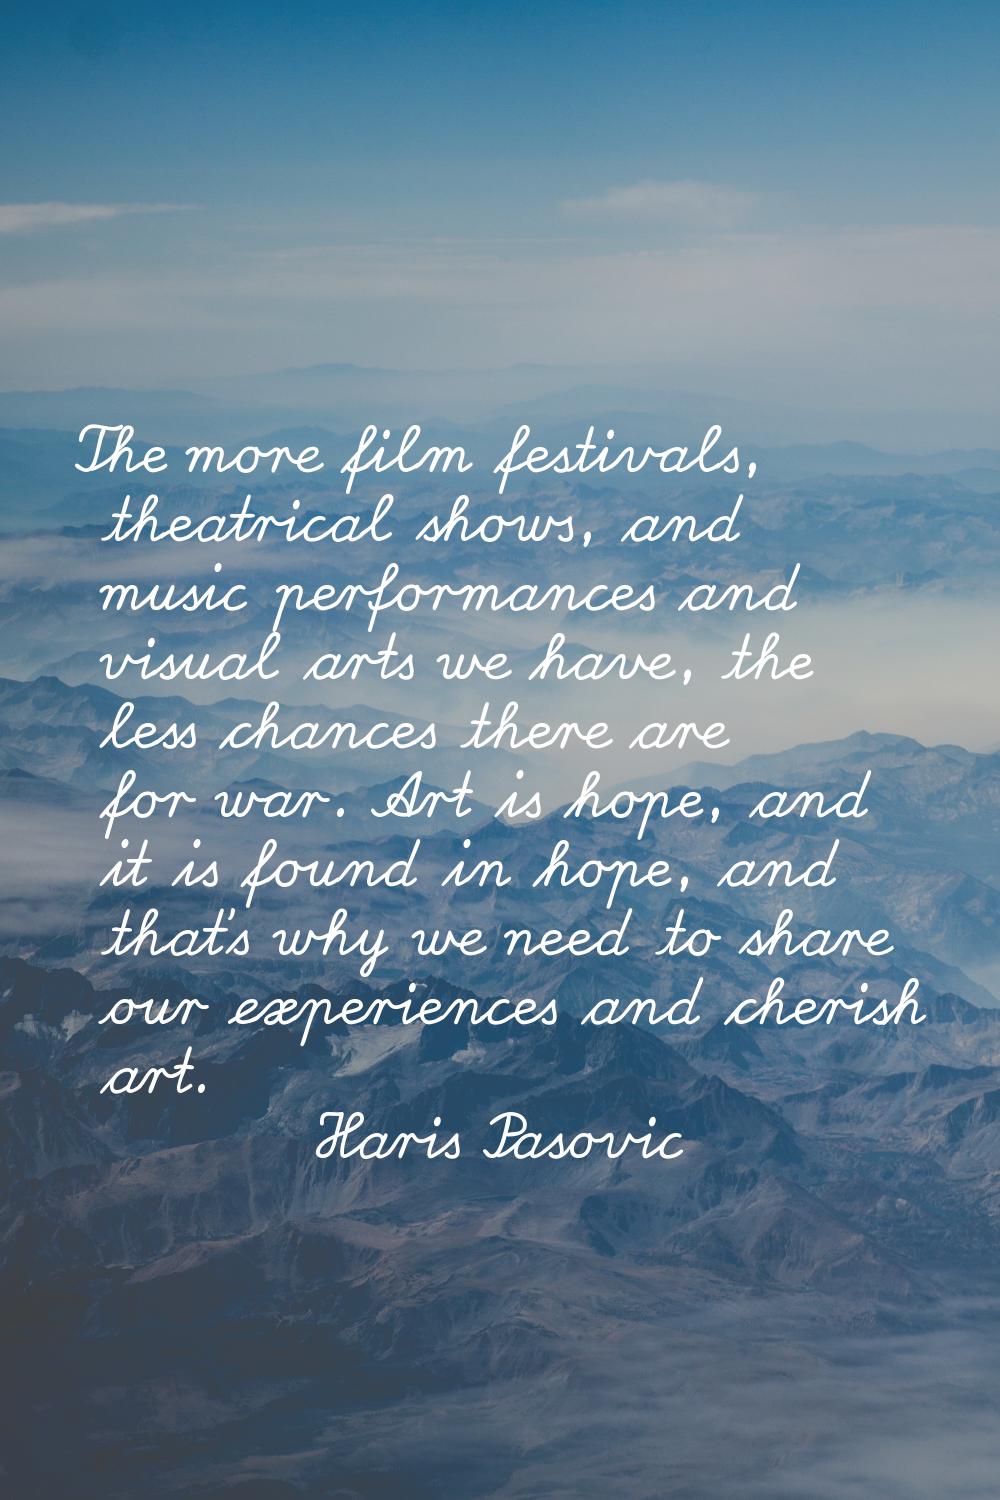 The more film festivals, theatrical shows, and music performances and visual arts we have, the less